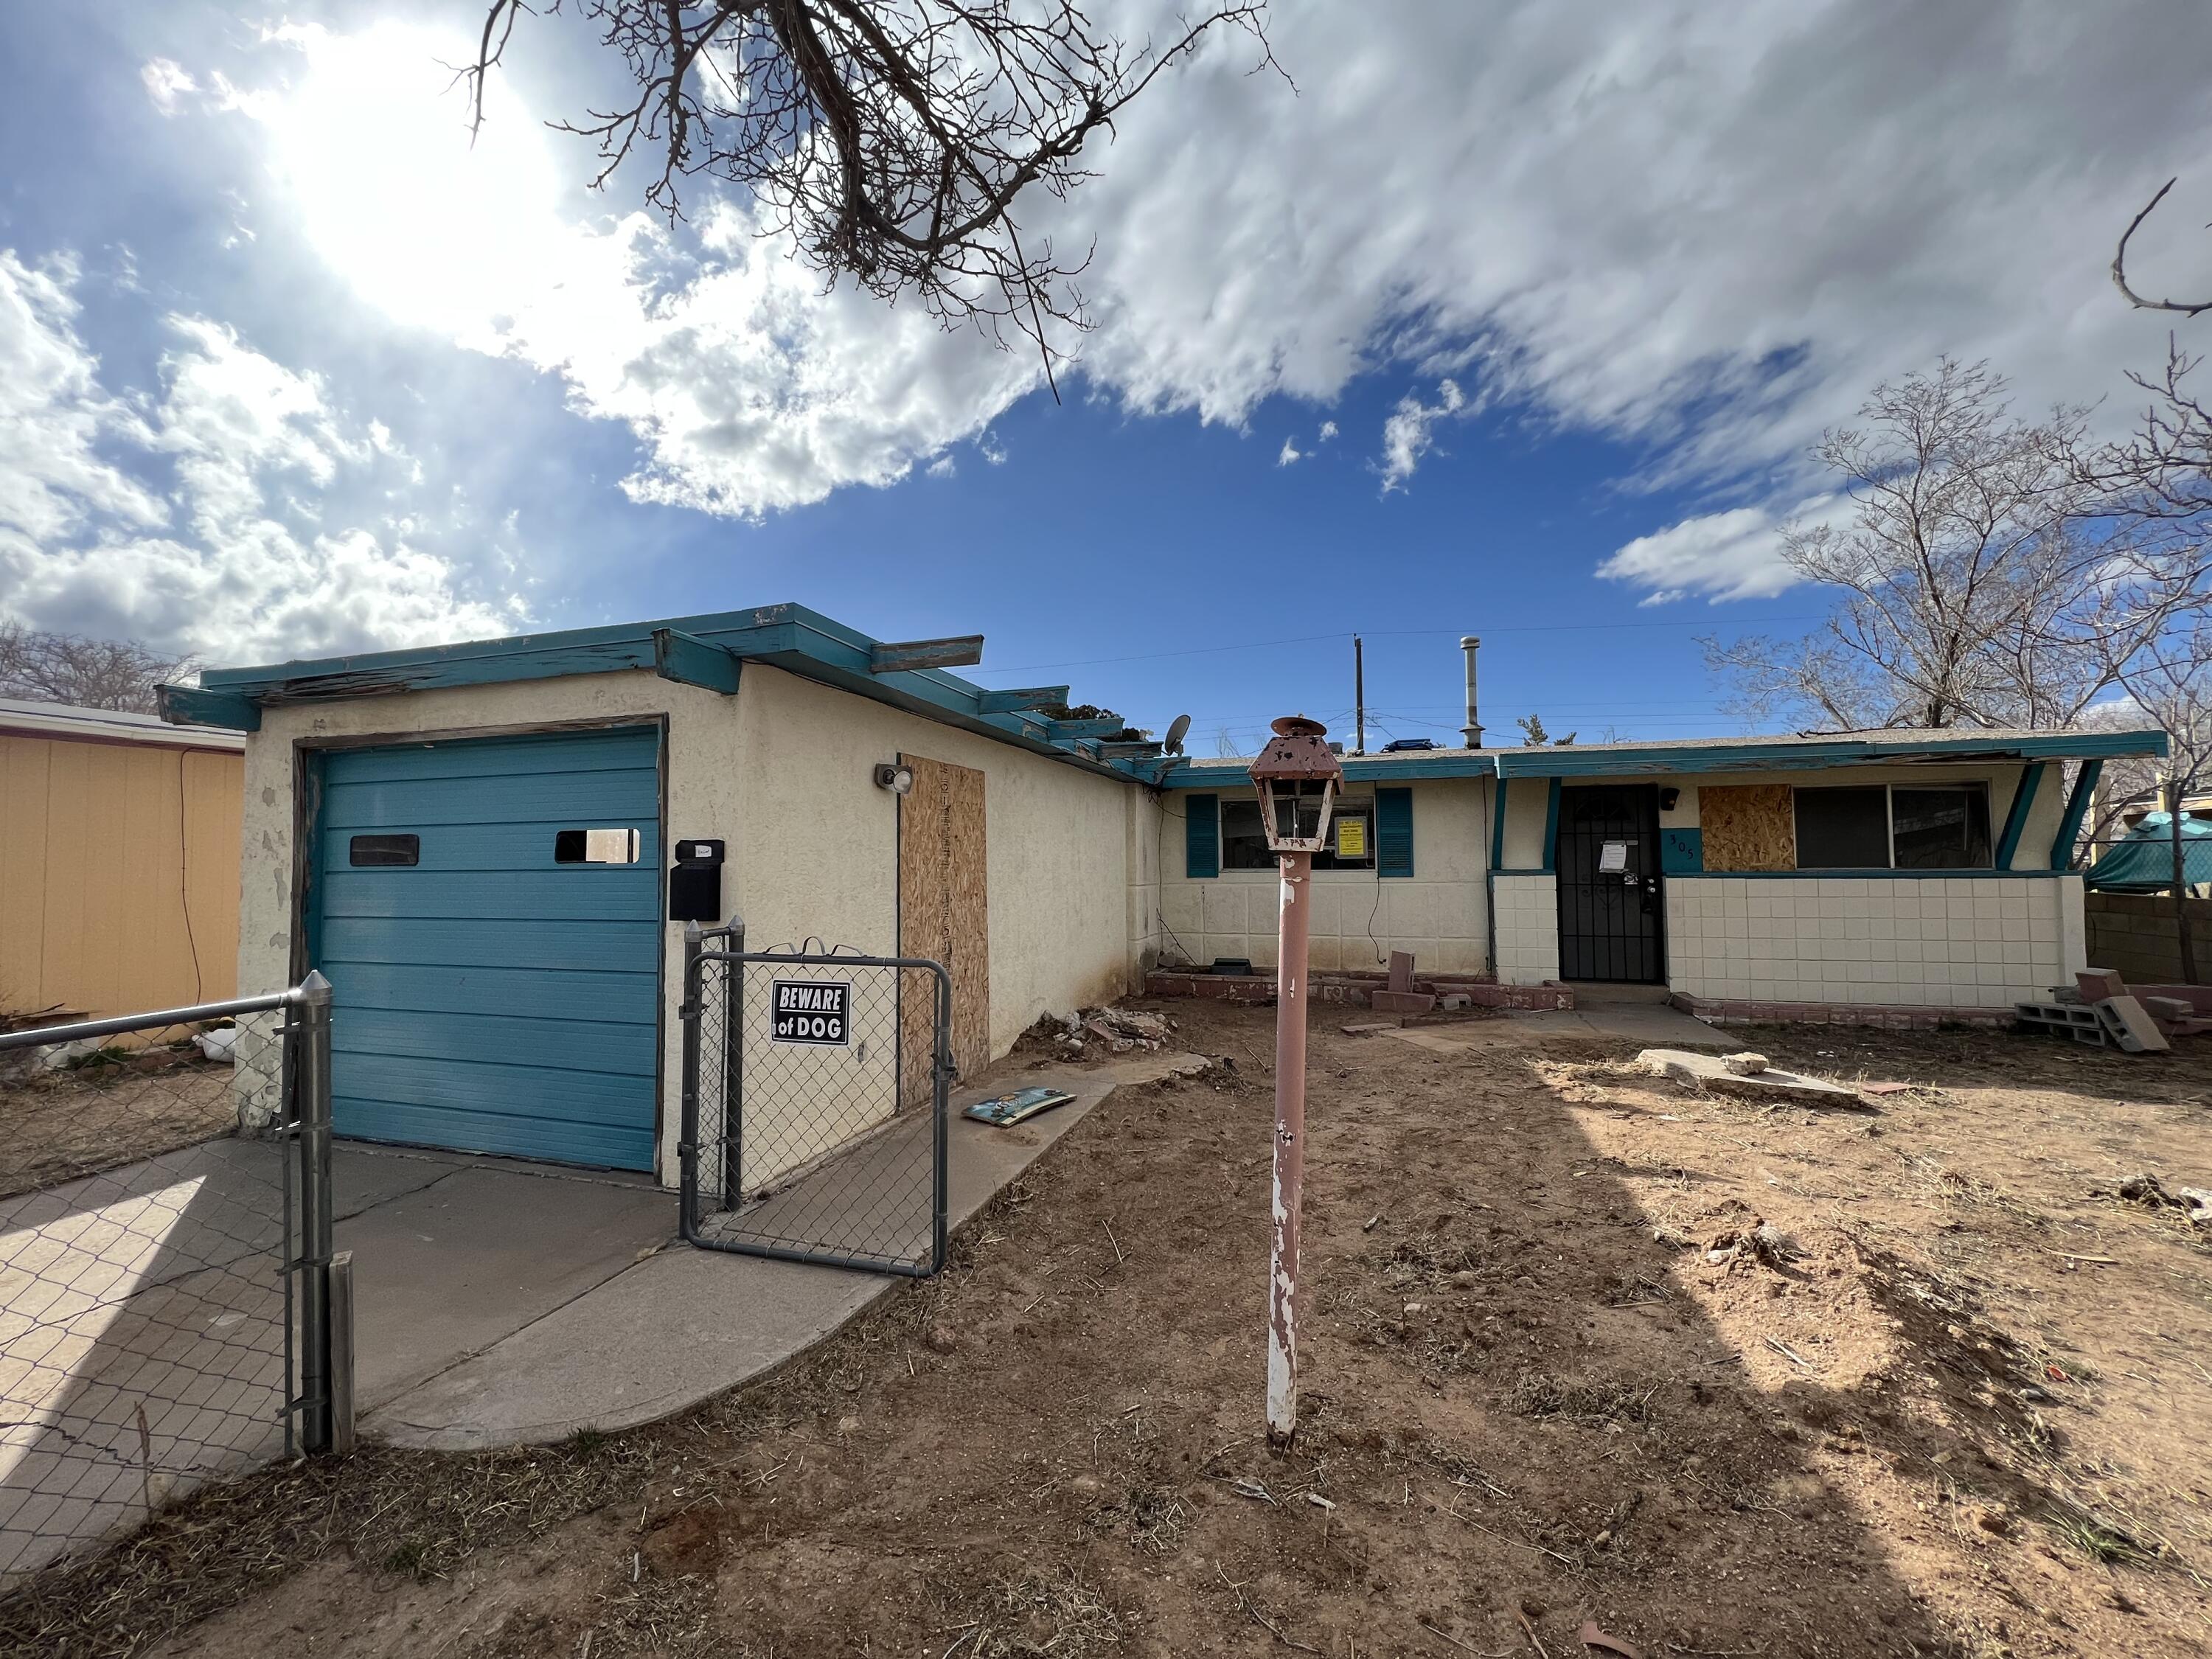 Investment property/ Needs TLC. Handyman Special. Does have upgraded electrical to 200 Amps and new sewer line. This home is 3 bedrooms 2 bathrooms with a 1 car garage. This property is sold in AS-IS condition.